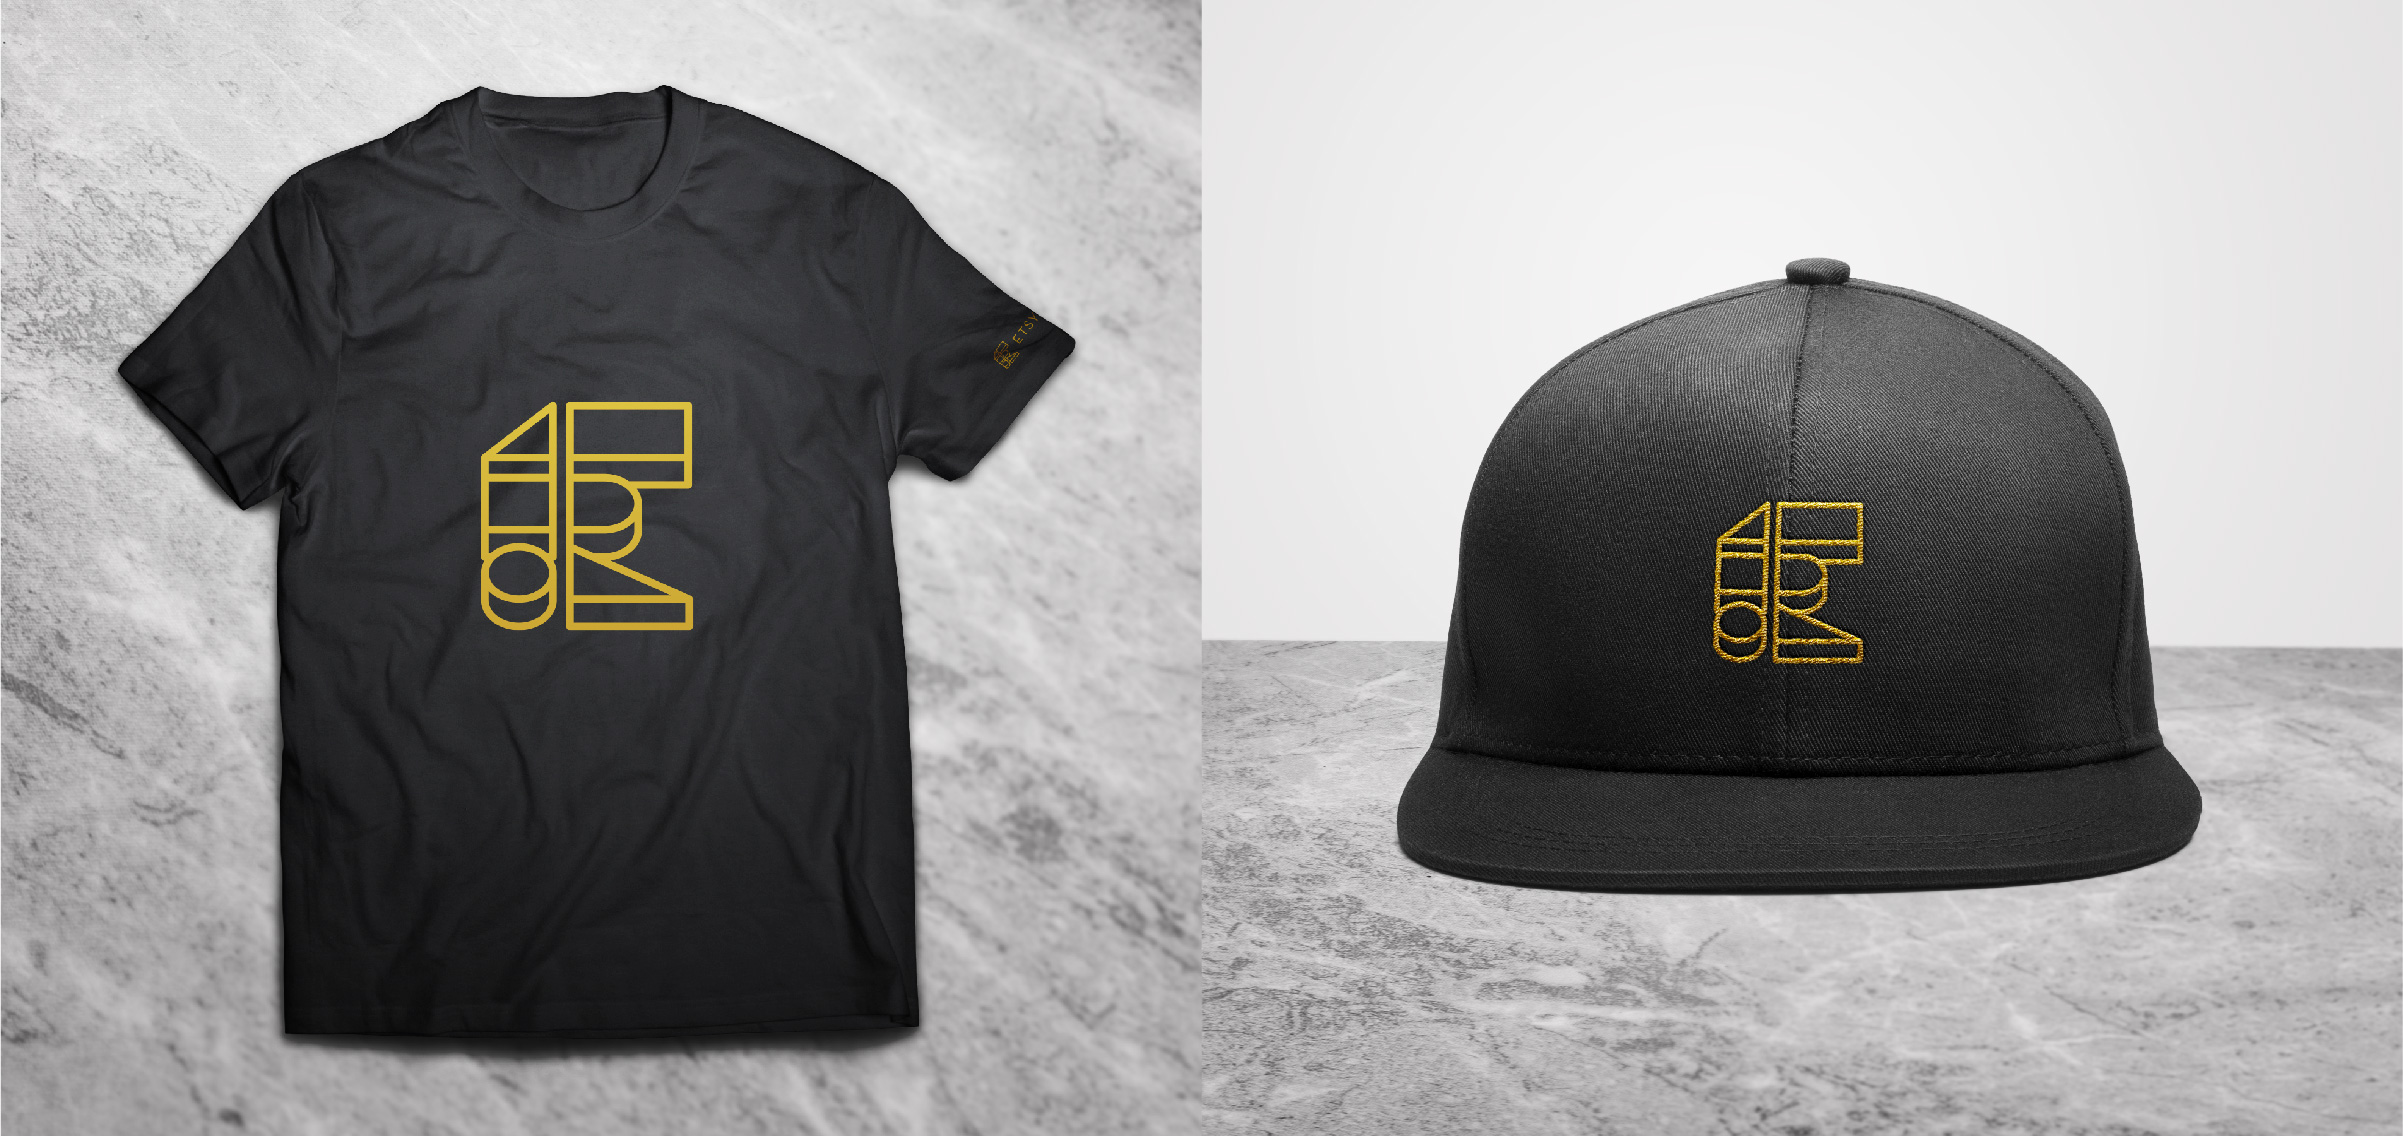 Etsy Brand Identity Apparell Mockup with Tshirt and Hat